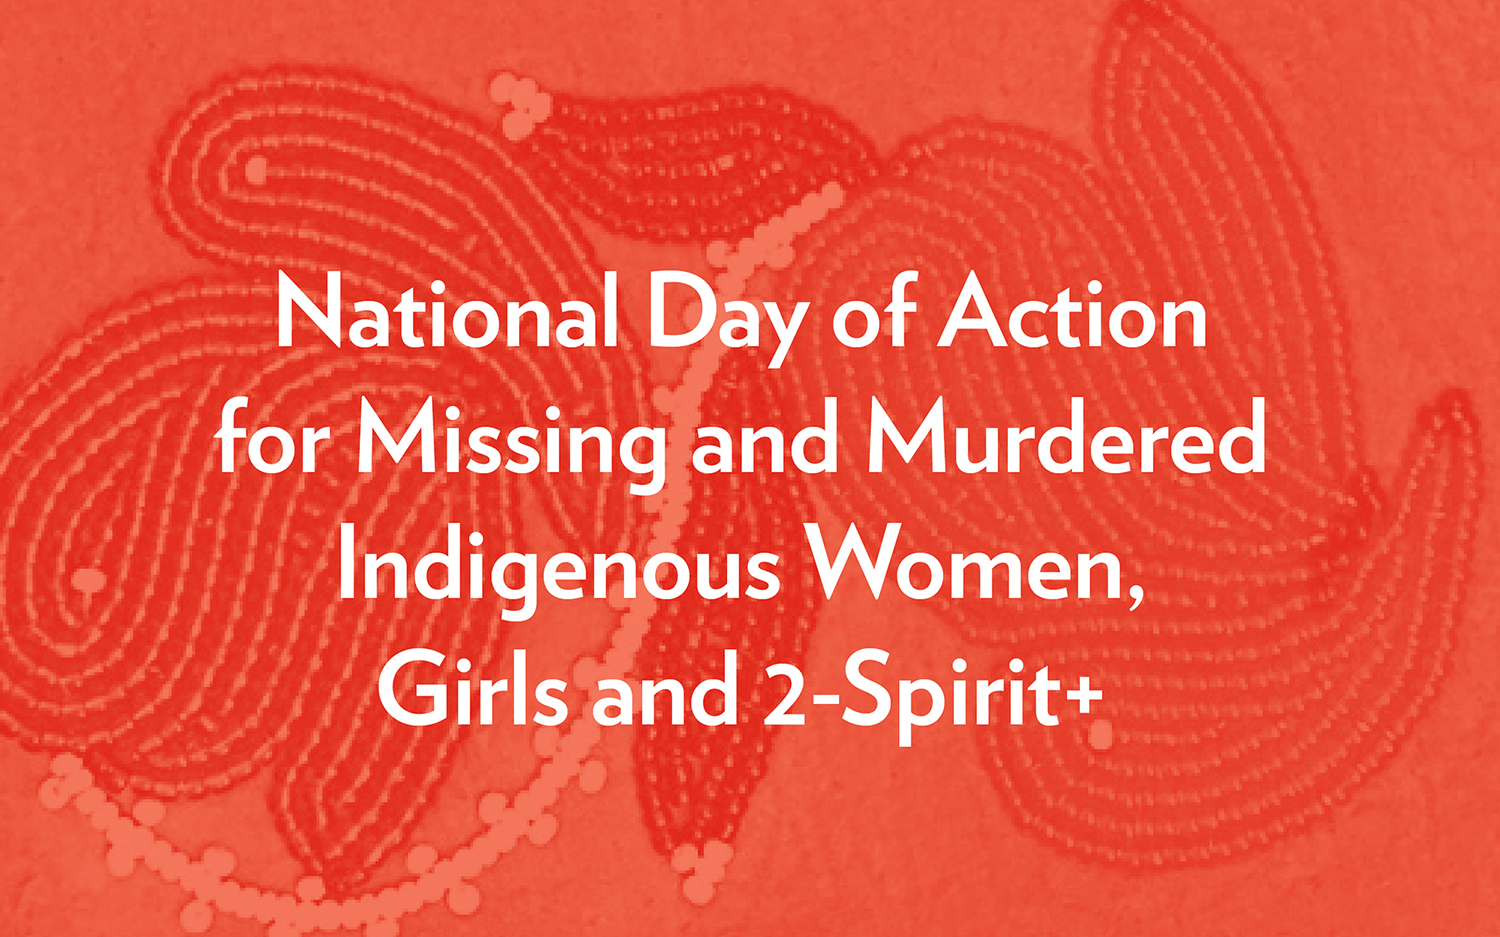 National Day of Action for Missing and Murdered Women, Girls and 2-Spirit+